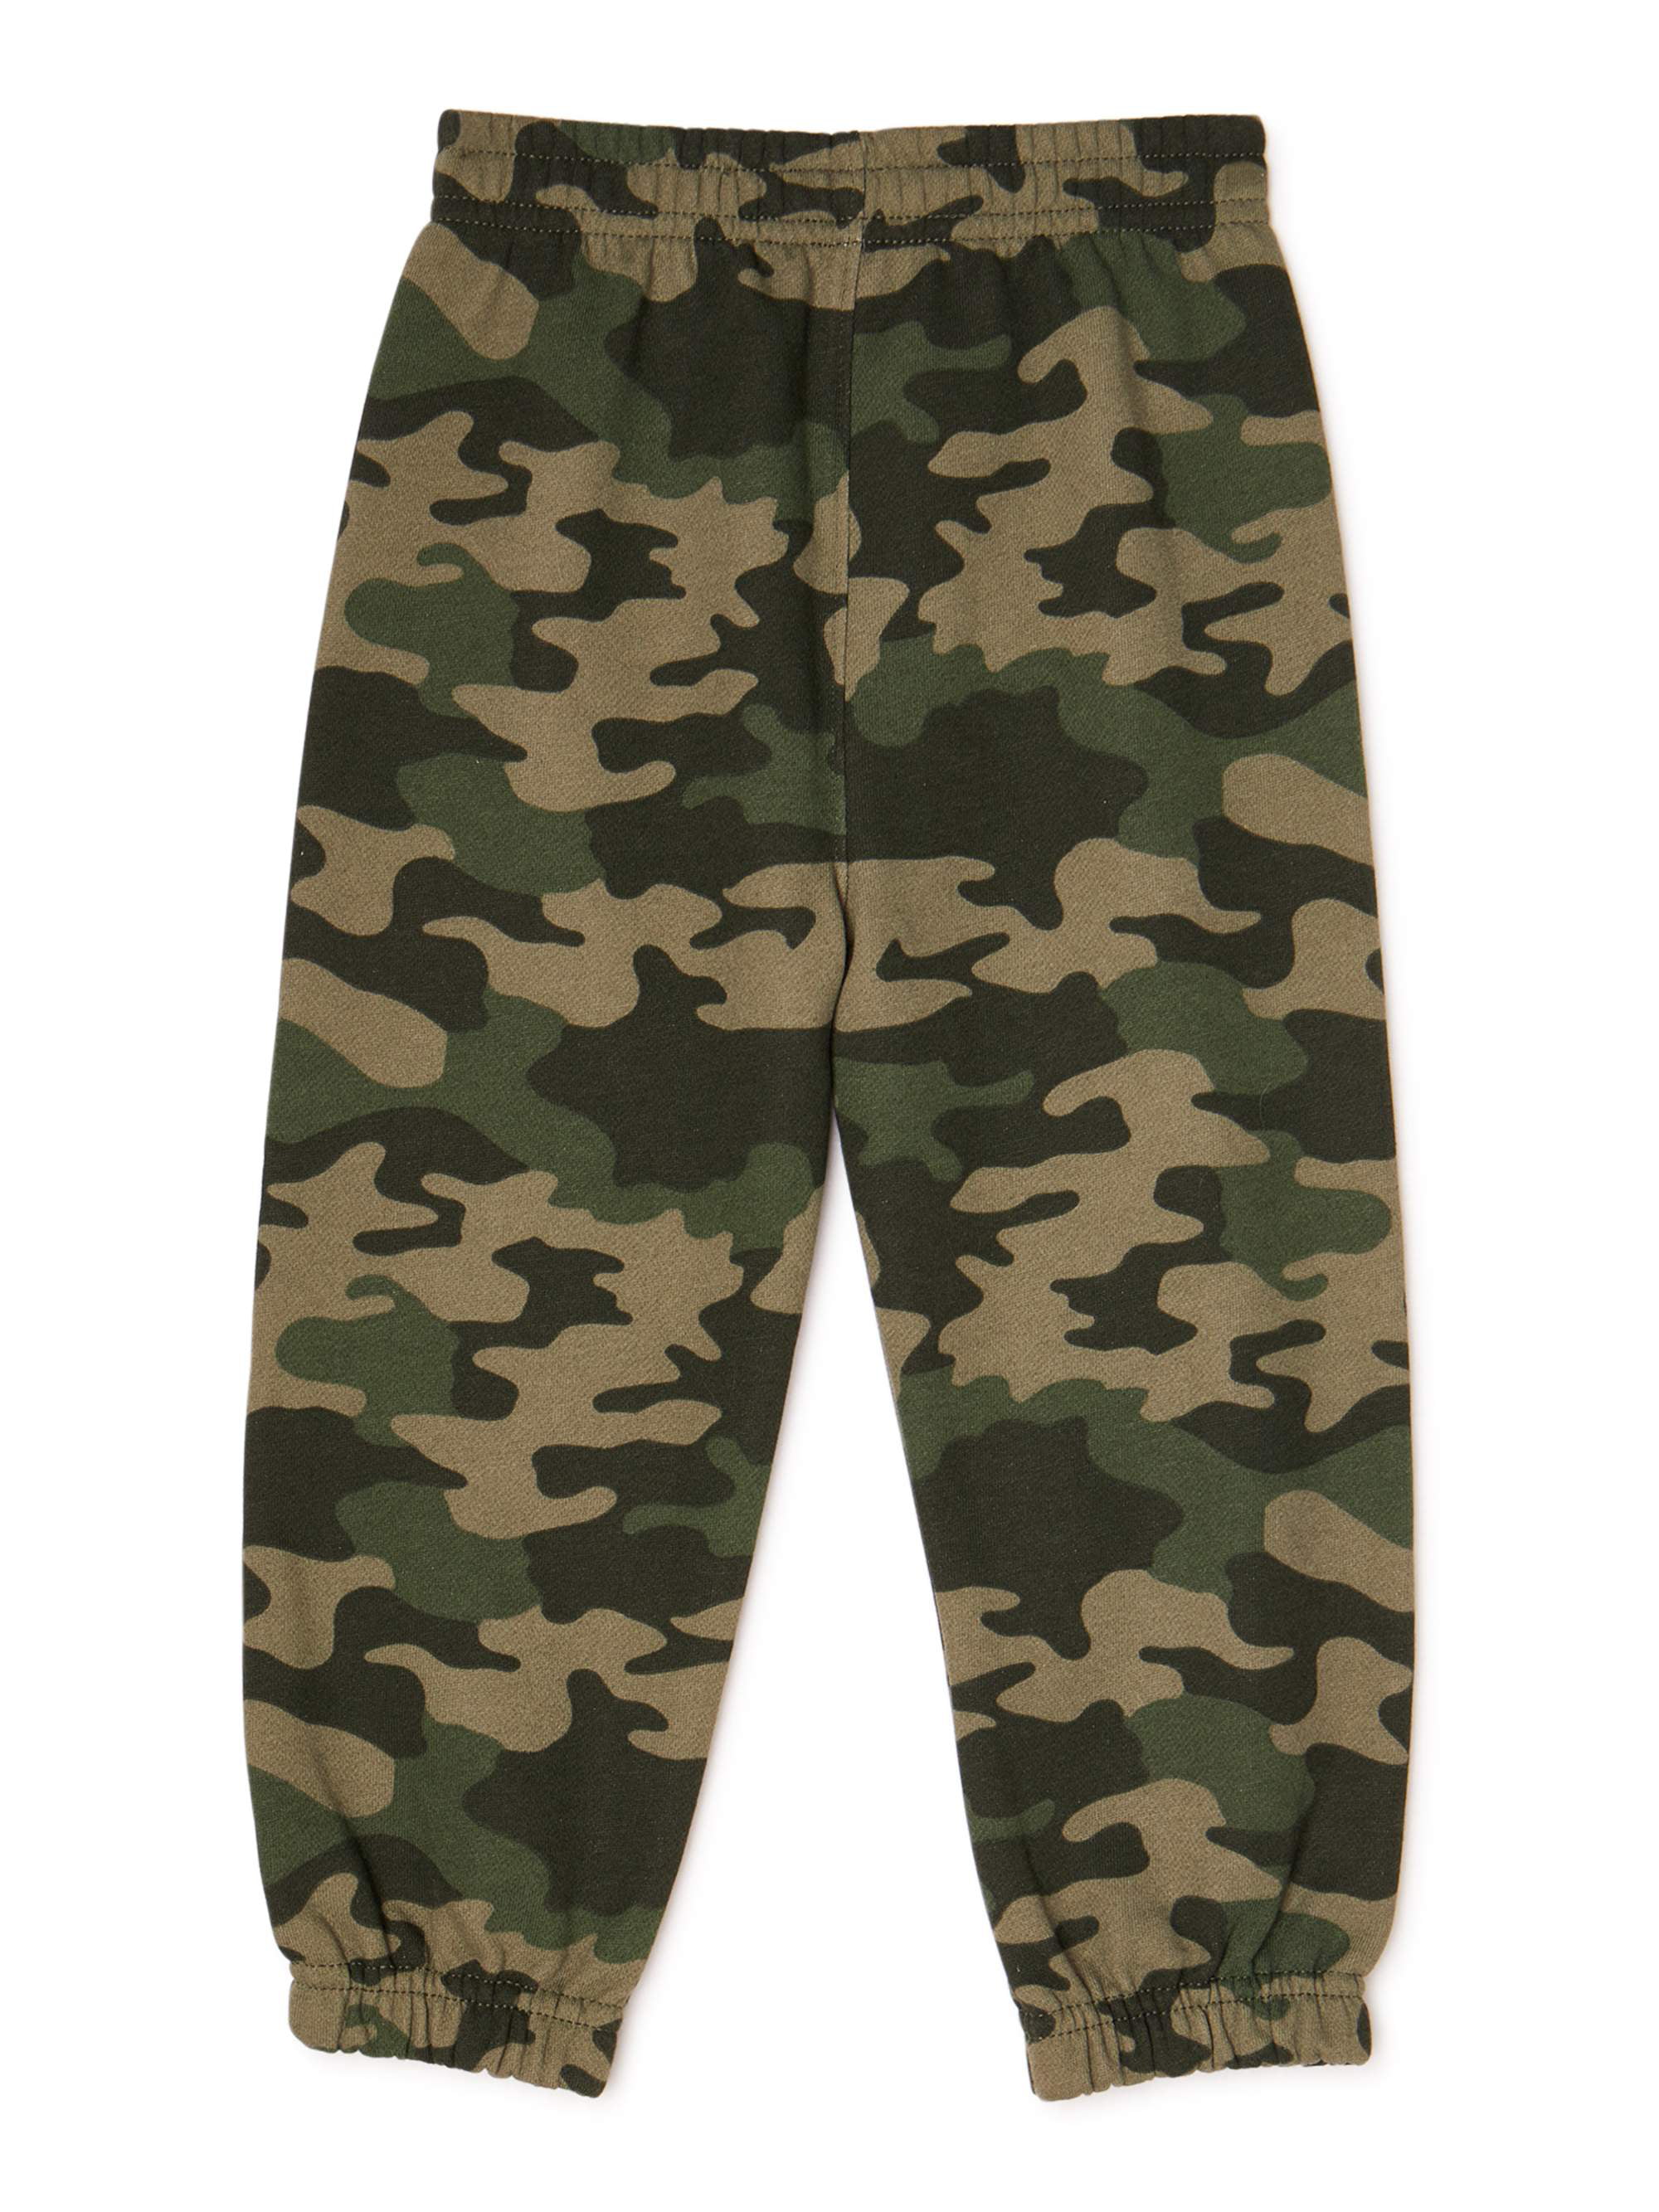 New Boys Multipack Kids Camo Designer Pull-On Elasticated Waist Jogger Camoflauge Jeans Pants by JEANBASE 